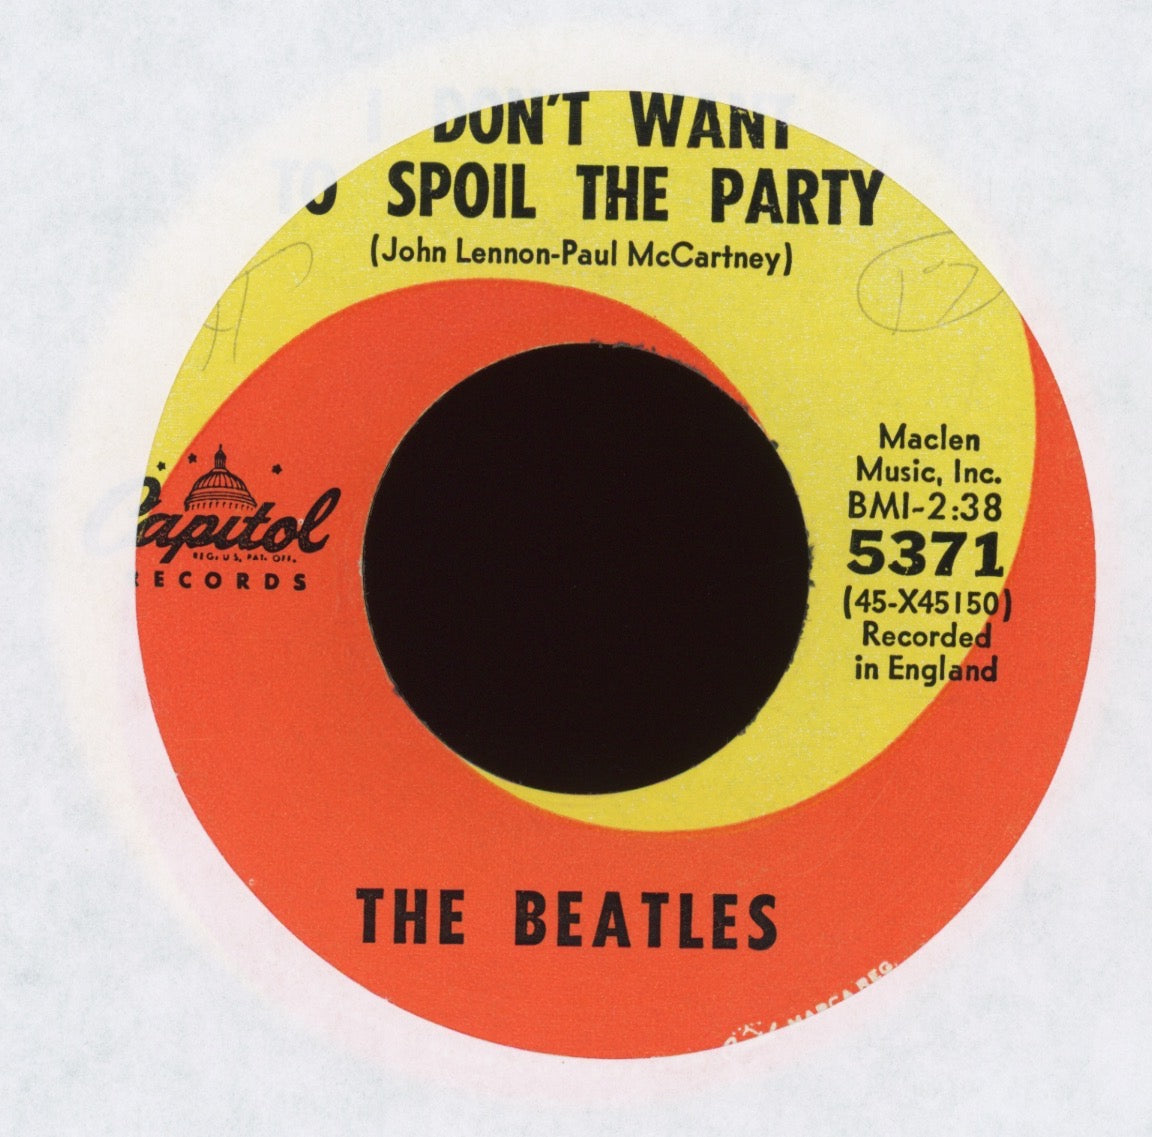 The Beatles - Eight Days A Week / I Don't Want To Spoil The Party on Capitol 45 With Picture Sleeve